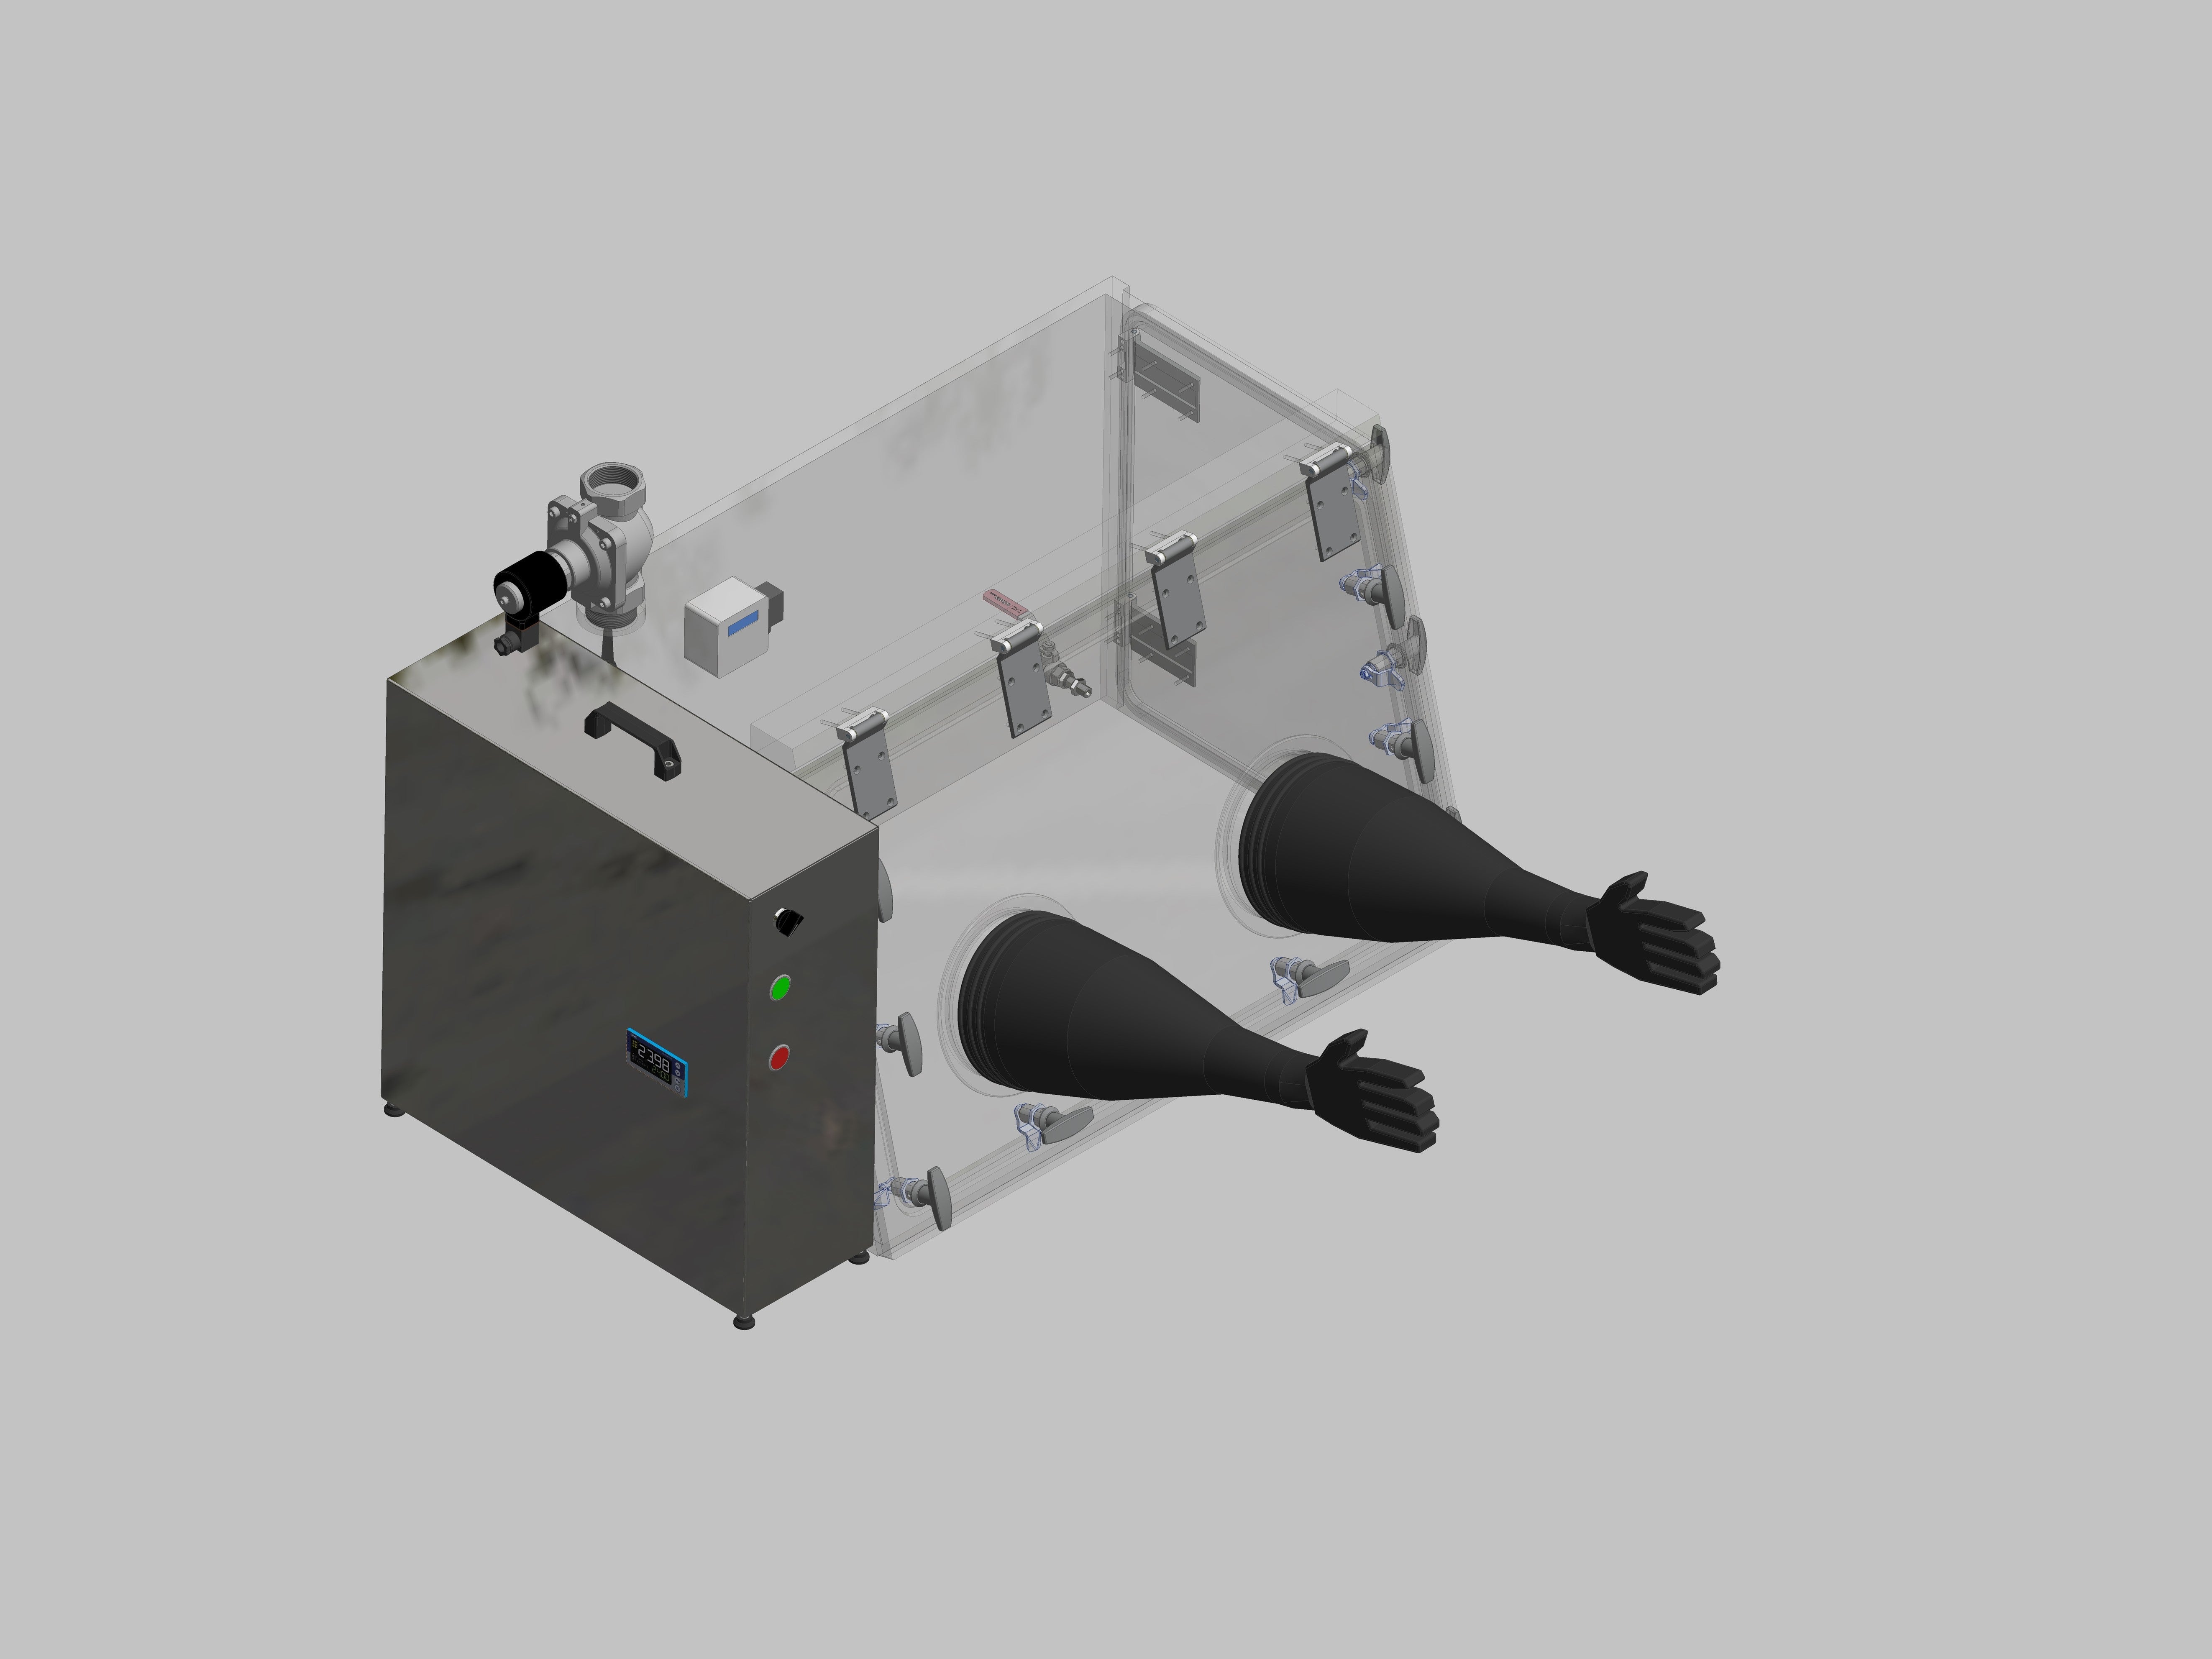 Glovebox made of acrylic &gt; Gas filling: automatic flushing with pressure control, front version: swivels upwards, side version: hinged doors, control: oxygen regulator